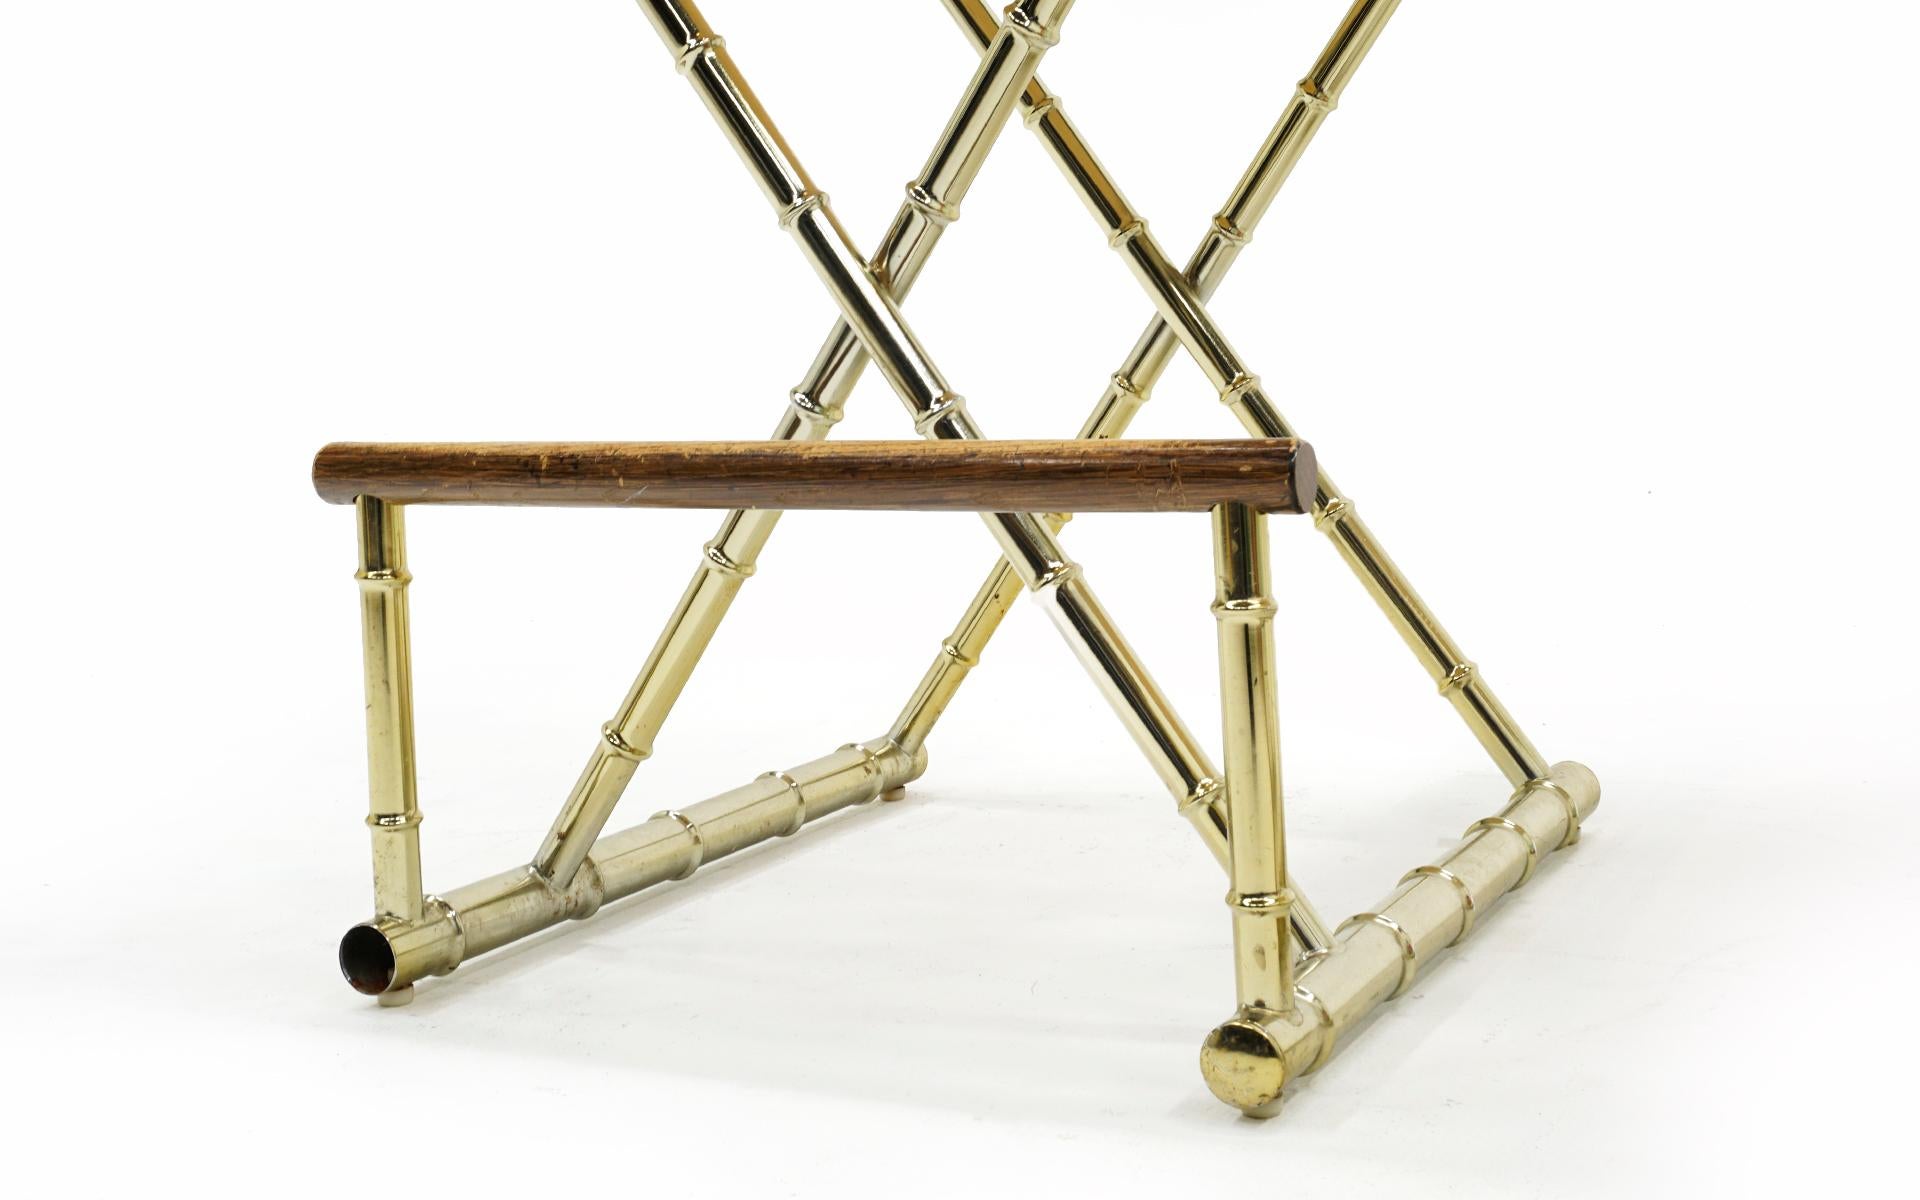 Pair of Campaign Style Bar Stools w/ Backs & Arms in Brass, Bamboo, and Rattan 1